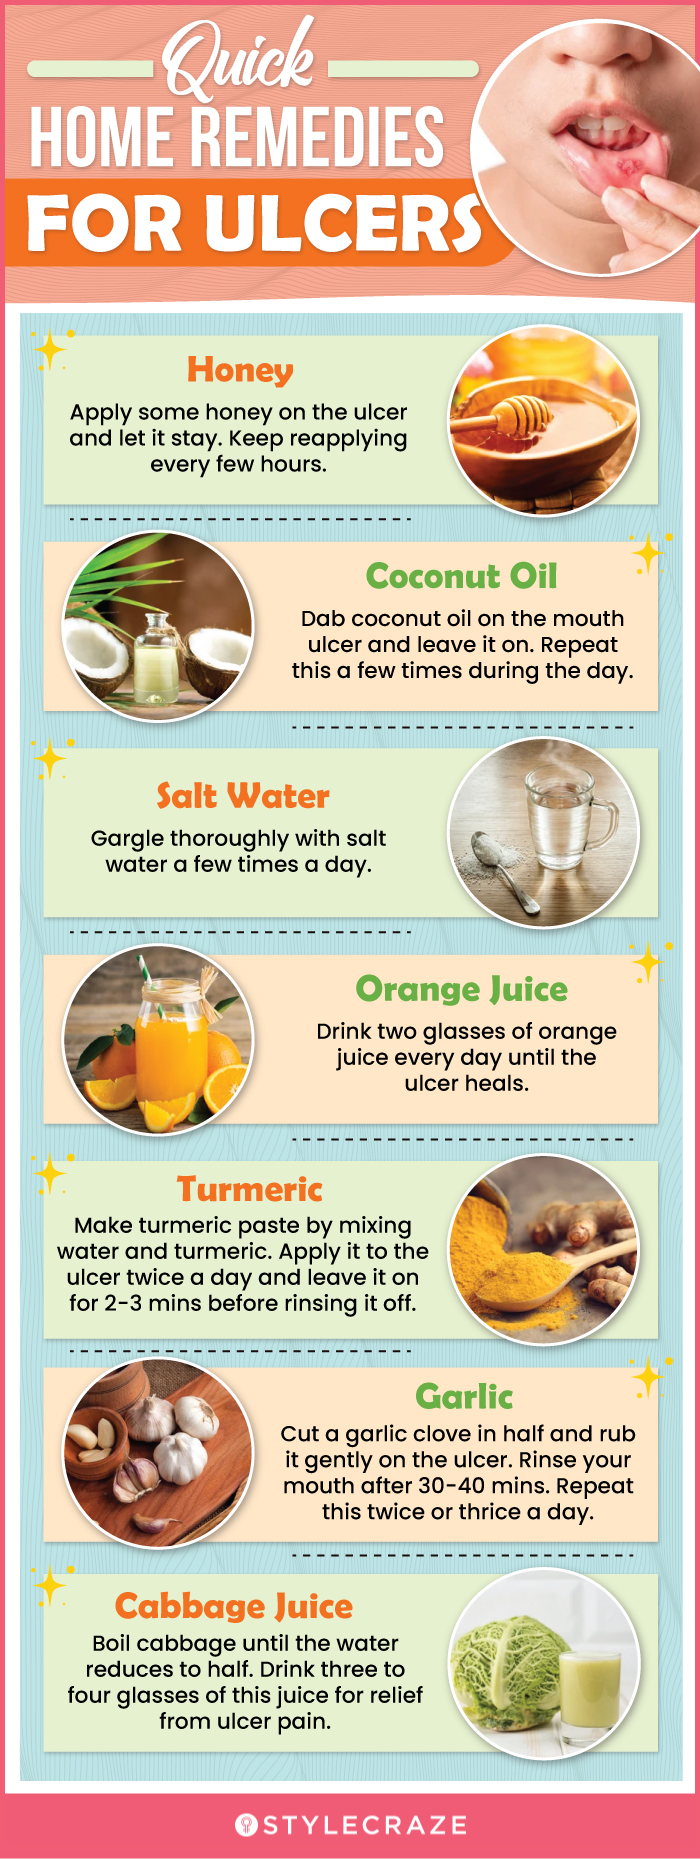 quick home remedies for ulcers (infographic)